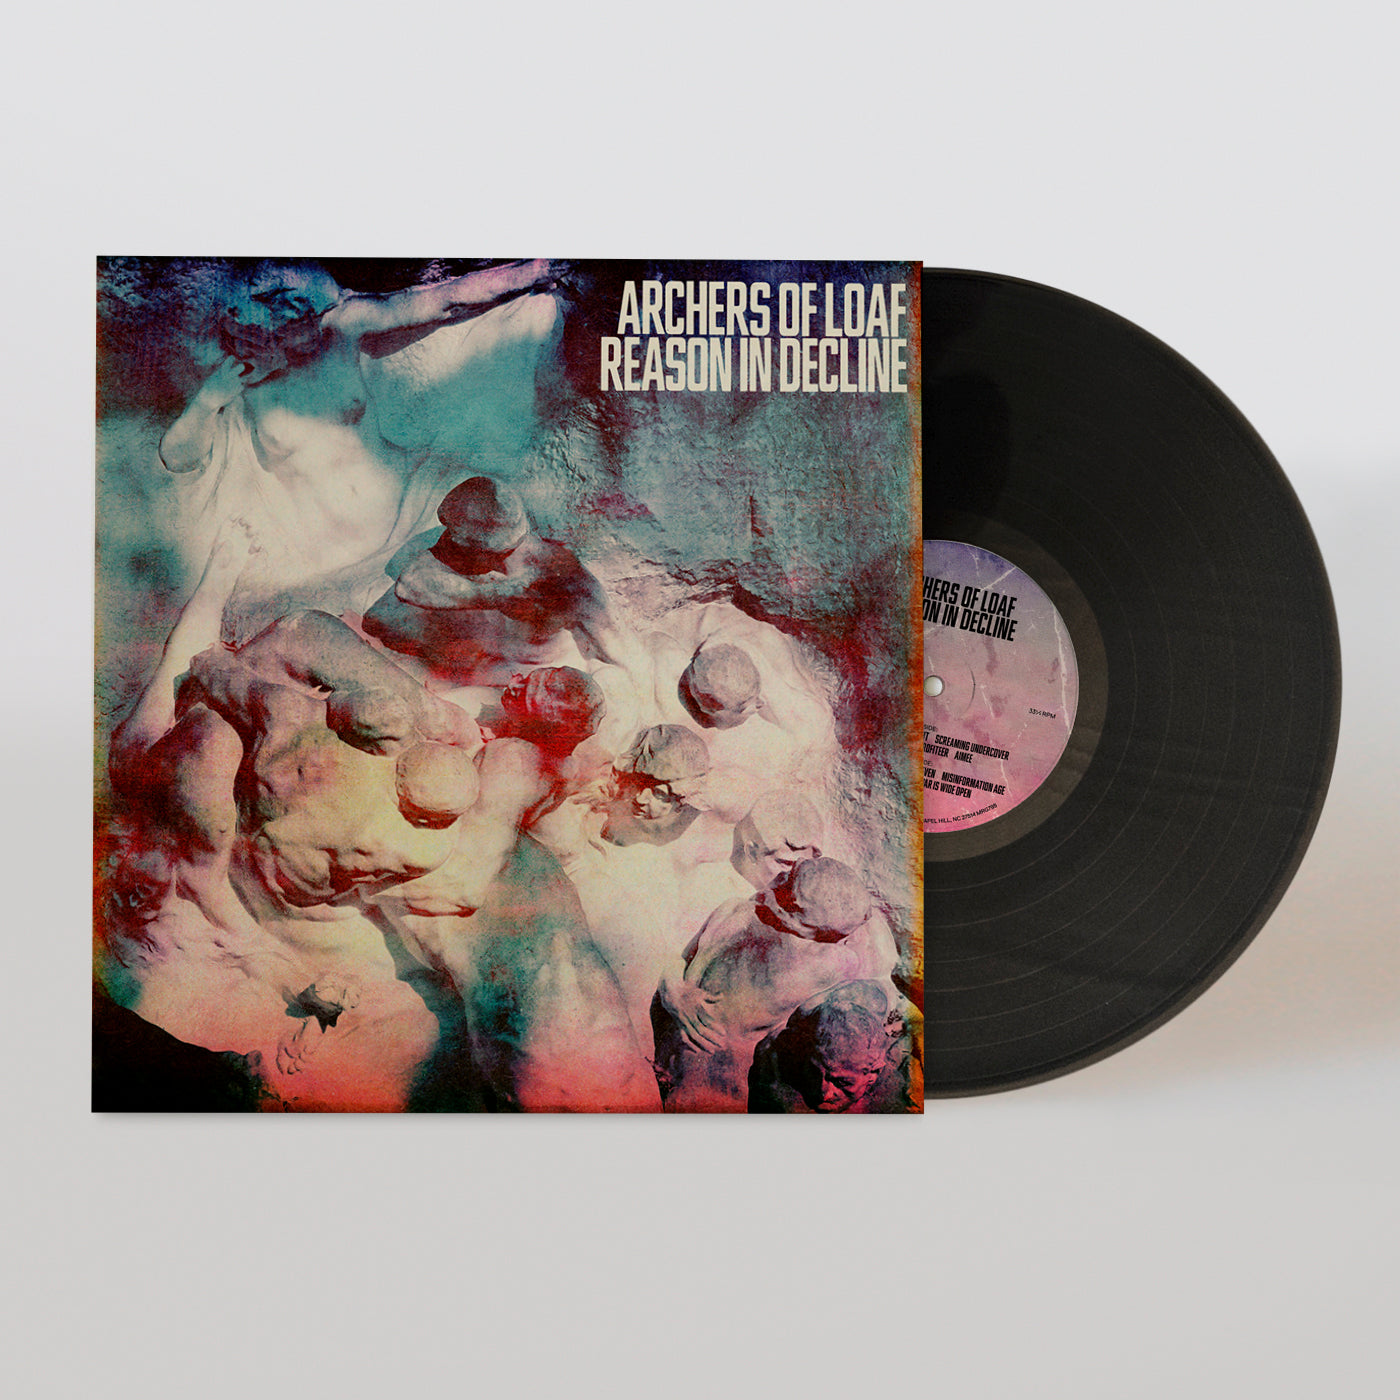 Archers of Loaf - Reason in Decline LP / CD